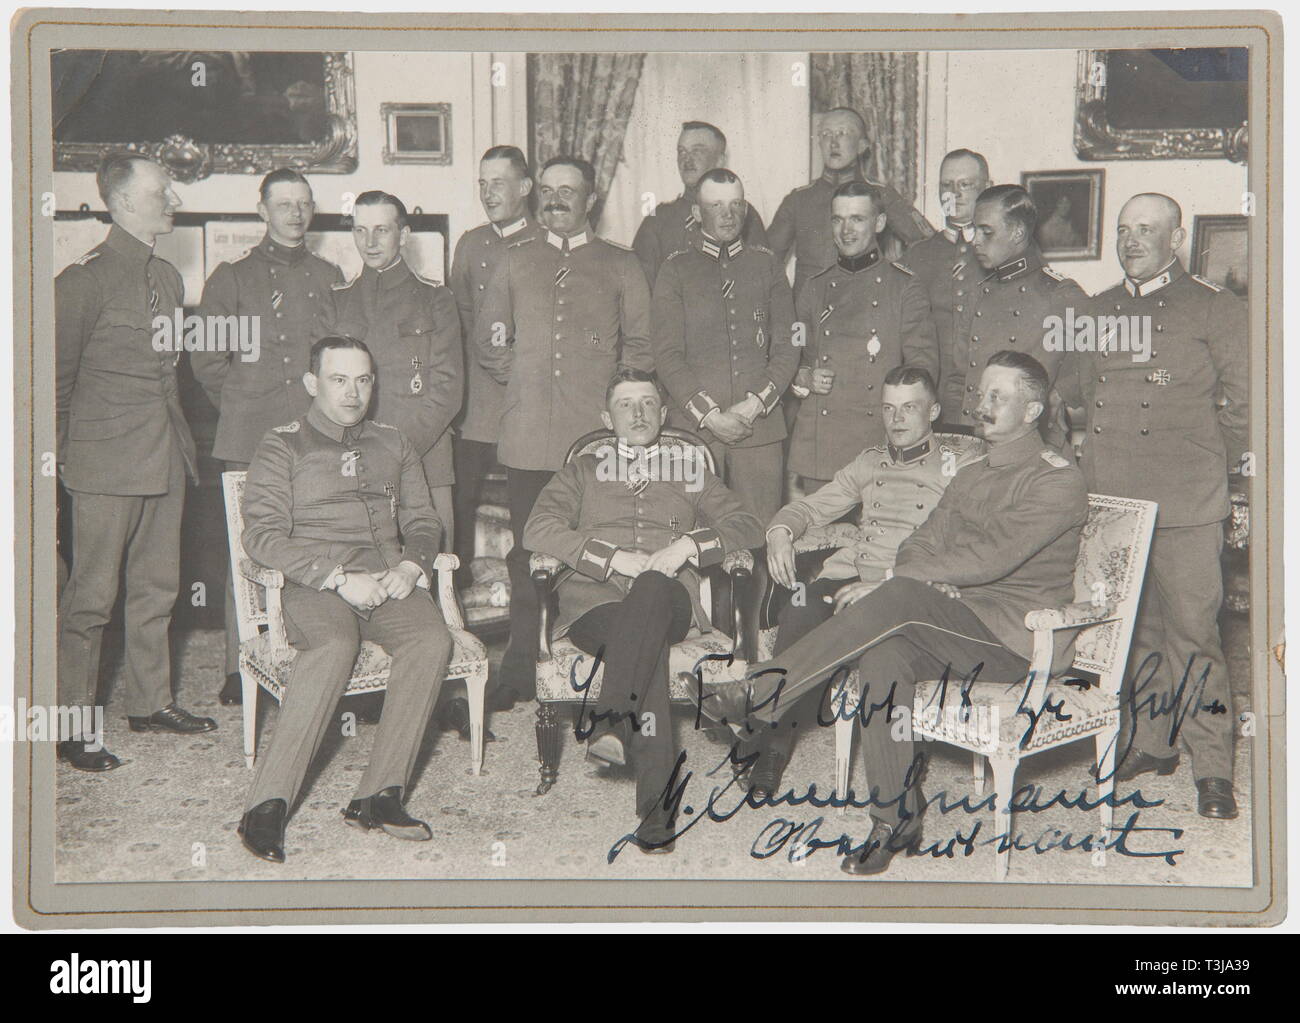 First Lieutenant Max Immelmann (1890 - 1916), a signed group photo with officers of the Feld Flieger Abteilung 18 Photo on cardboard mount, the lower right edge with the ink signature 'Visiting the FFA 18. M. Immelmann First Lieutenant'. After his air victories no. 12 and 13 in late March 1916, the King of Saxony awarded Immelmann the Commander's Cross of the Military Order of St. Henry (which he is wearing together with the Pour le mérite around his neck). He was promoted to First Lieutenant after his 14th victory on 23rd April. historic, histor, Additional-Rights-Clearance-Info-Not-Available Stock Photo